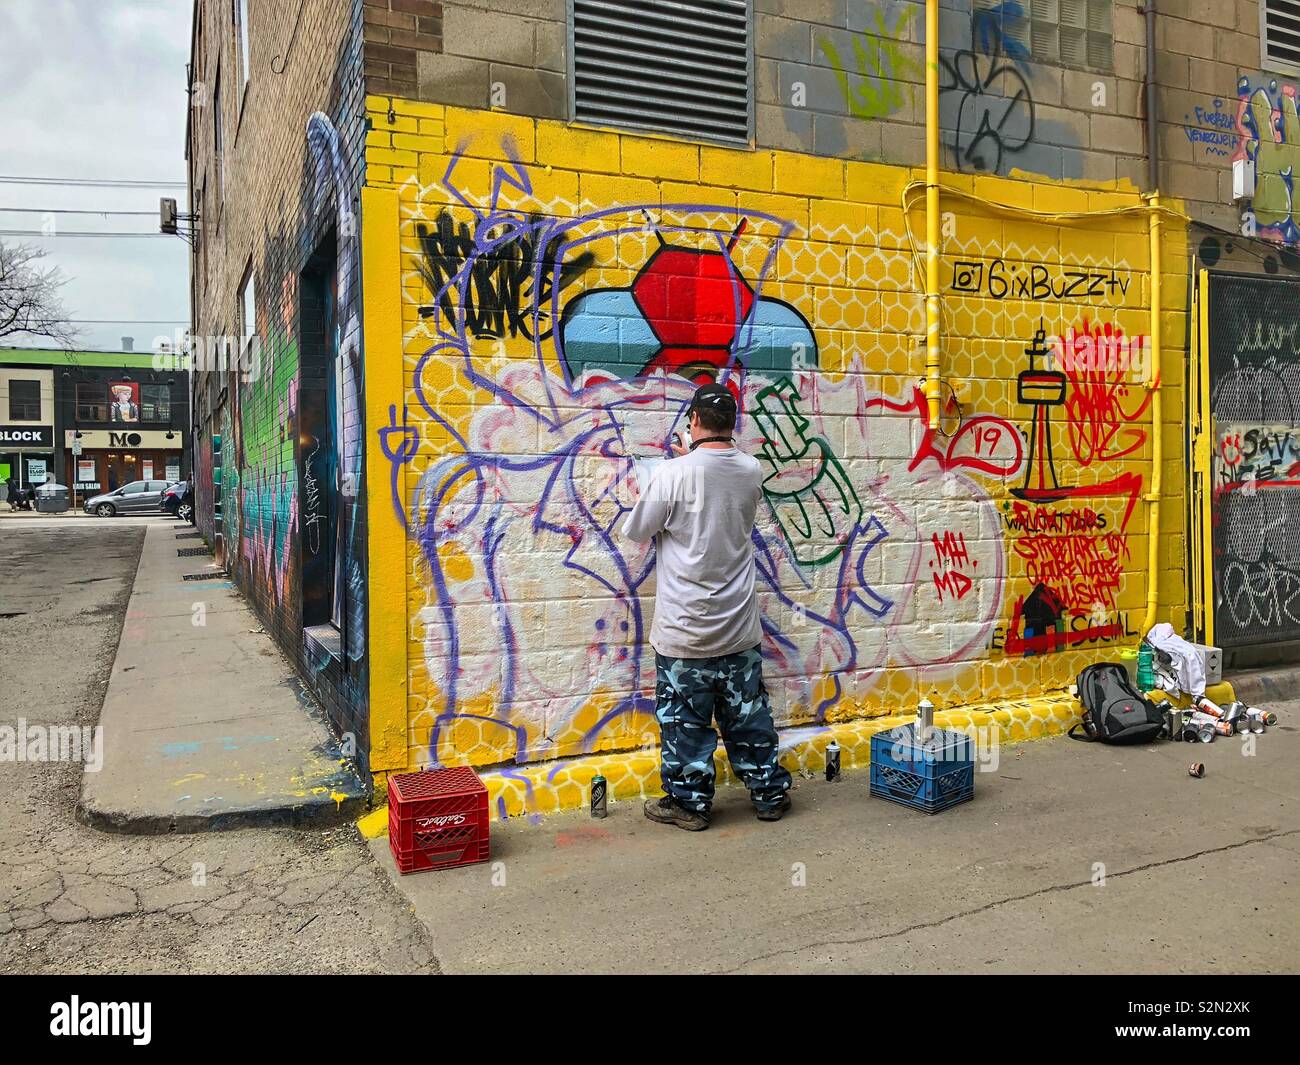 A Graffiti Artist At Work In Downtown Toronto Canada Stock Photo Alamy